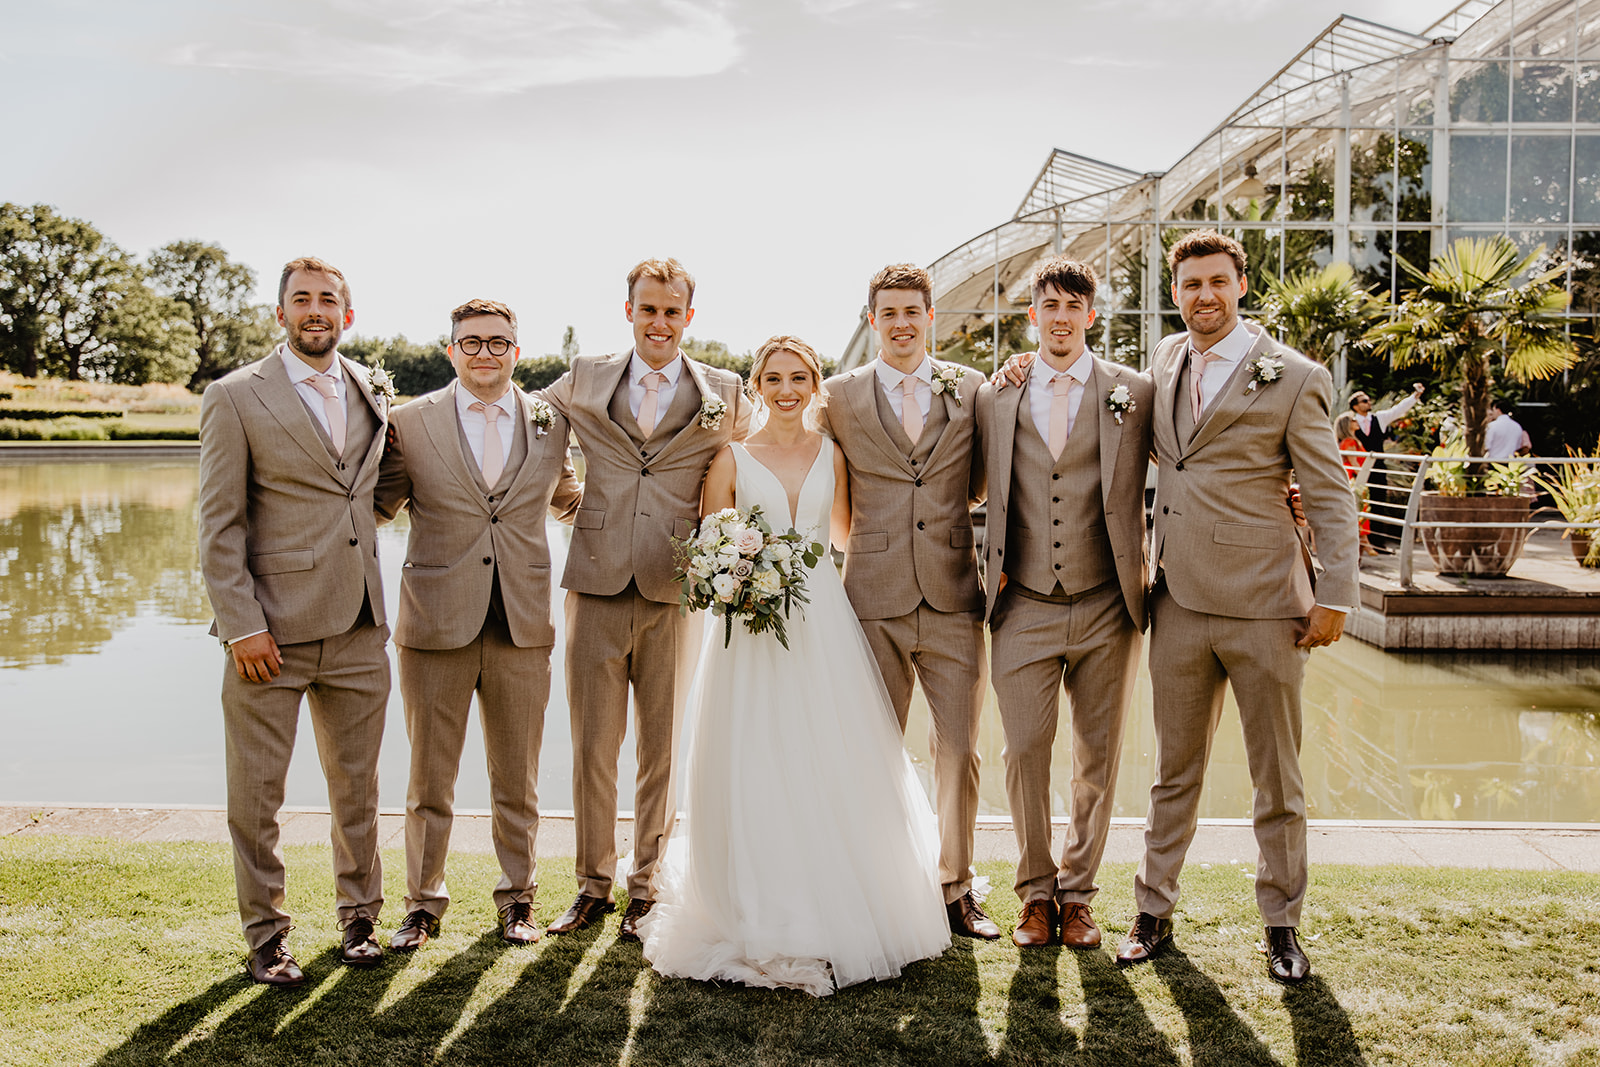 Bride, groom and groomsmen at a RHS Gardens Wisley Wedding. By Olive Joy Photography